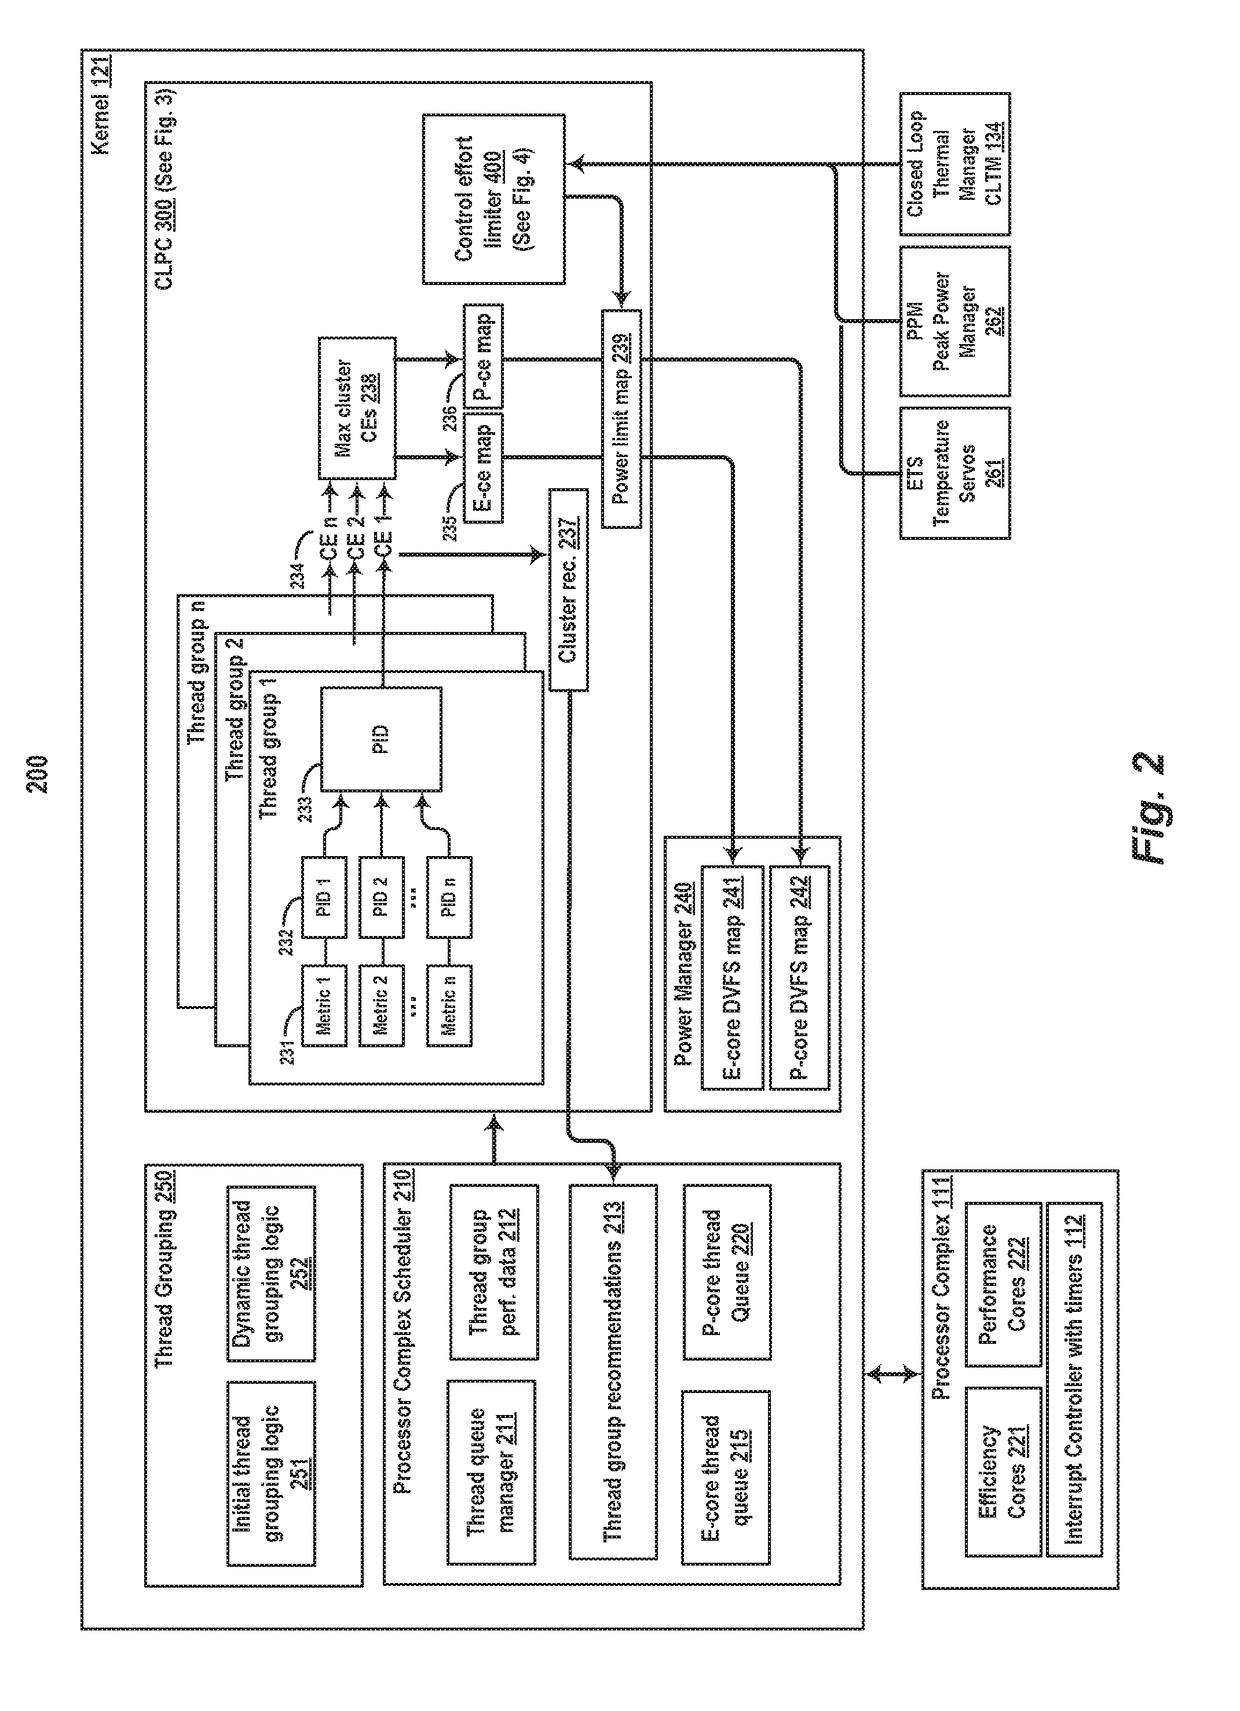 Scheduling of work interval objects in an amp architecture using a closed loop performance controller